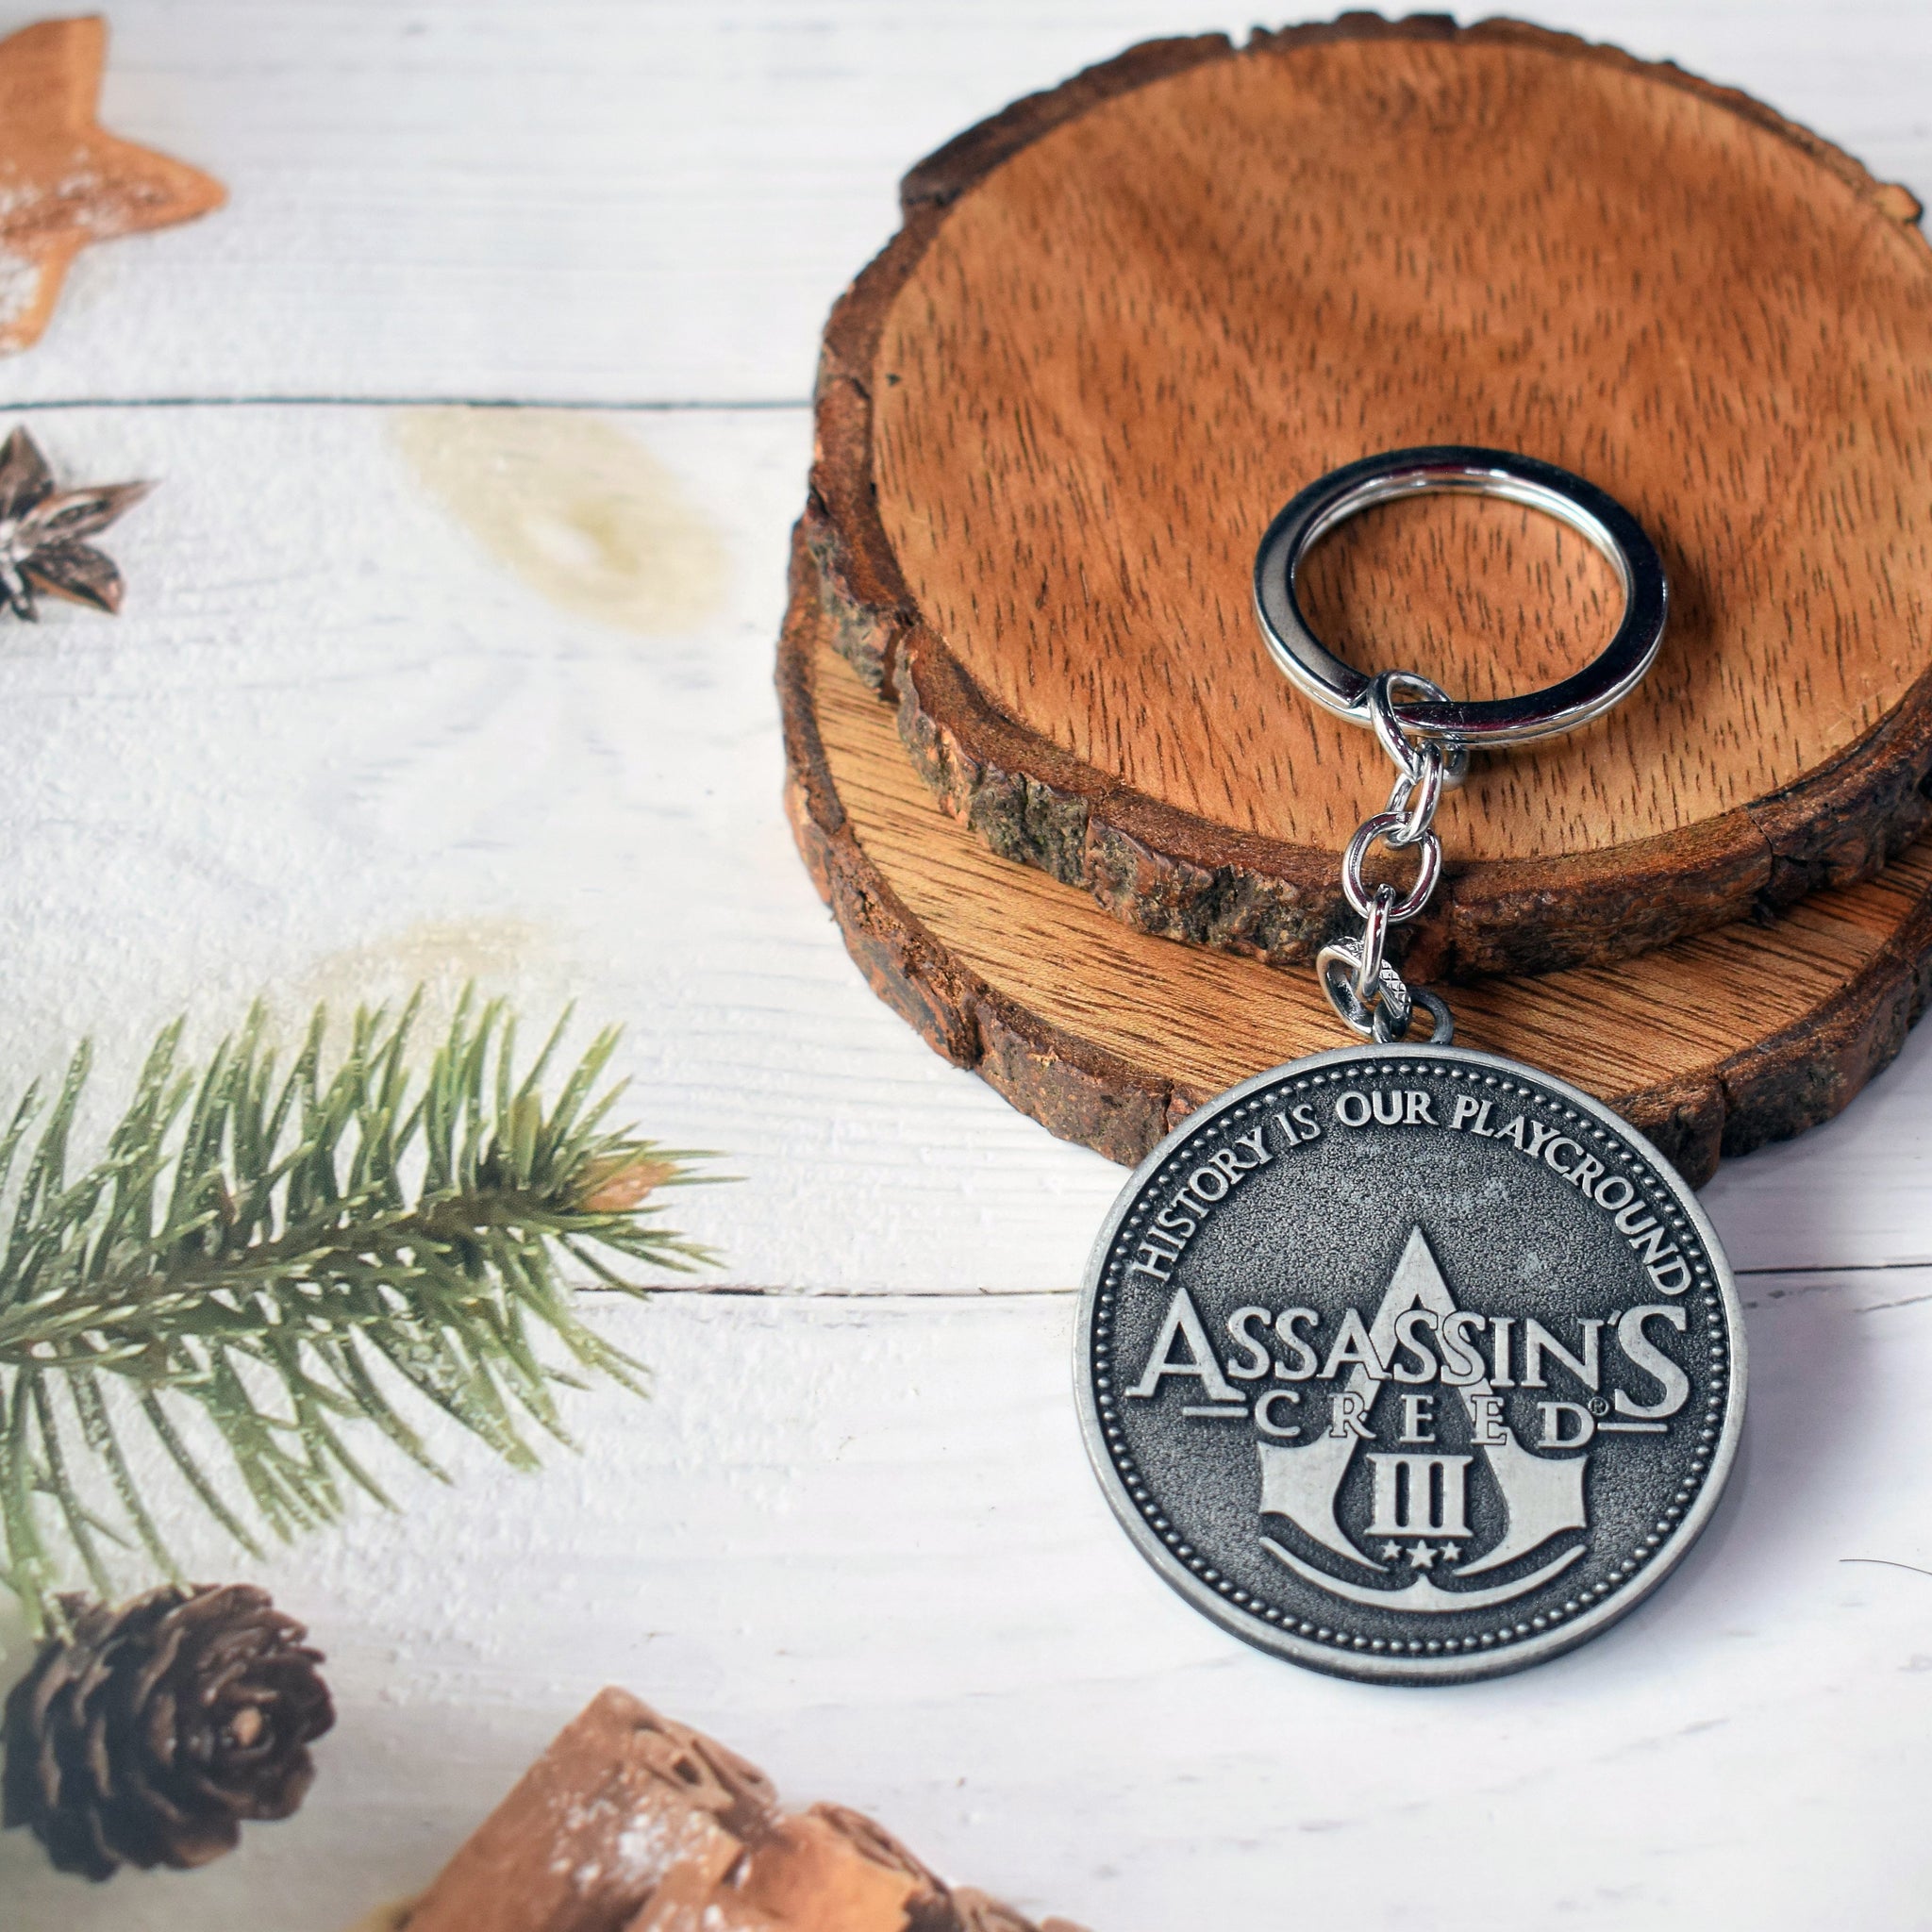 Assassin's creed Metal Keychain